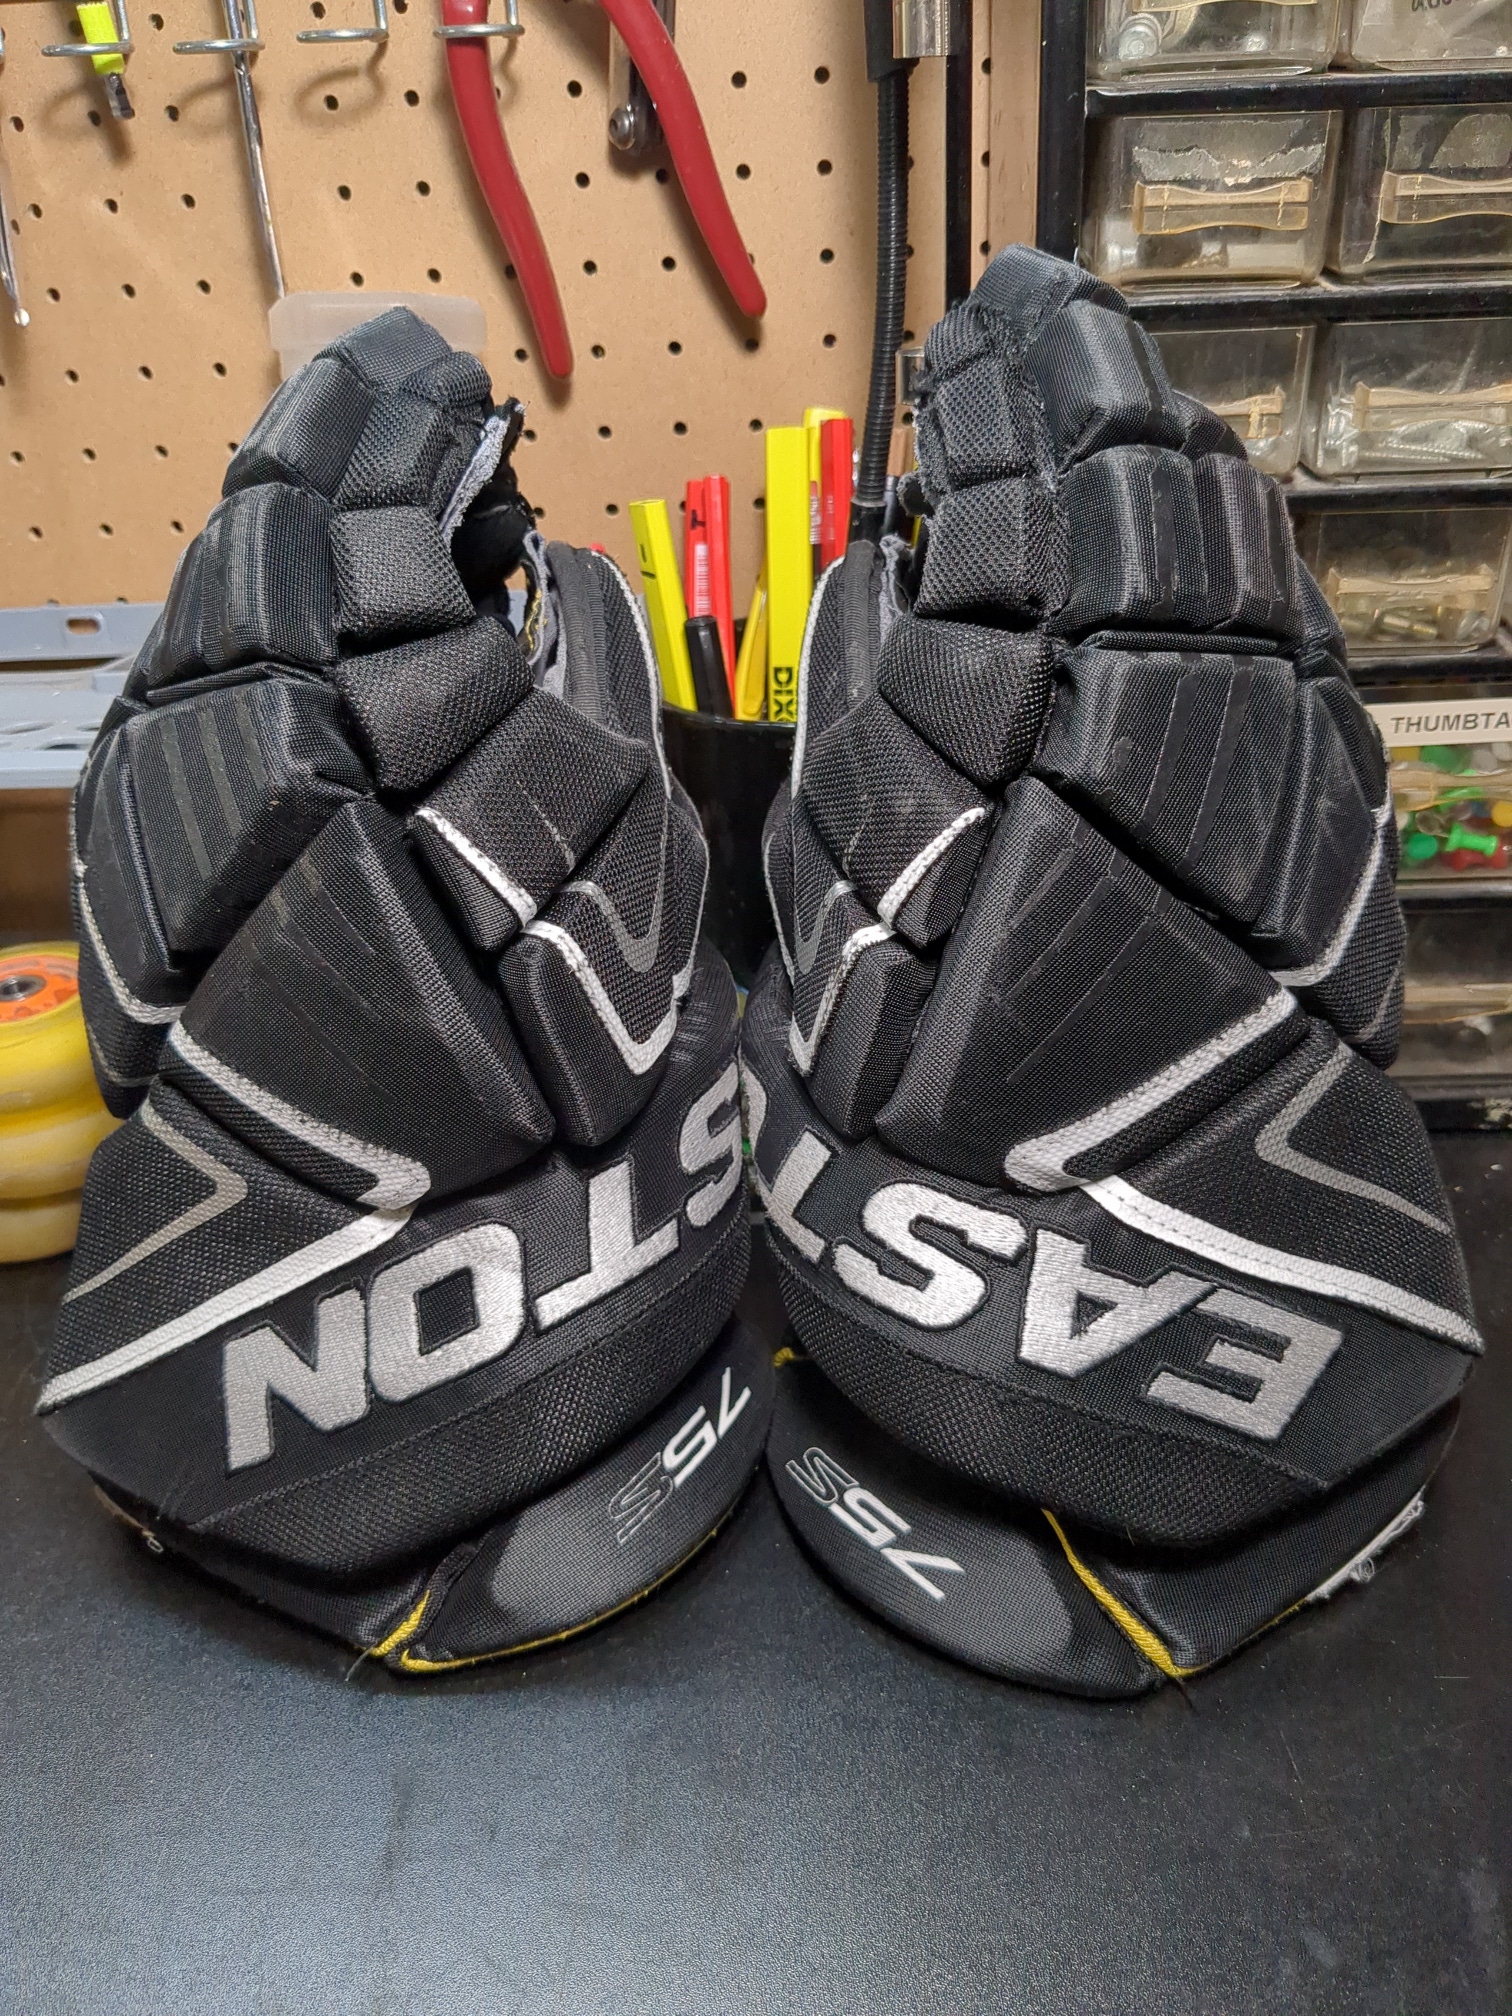 Used Easton Stealth 75s Gloves 14"